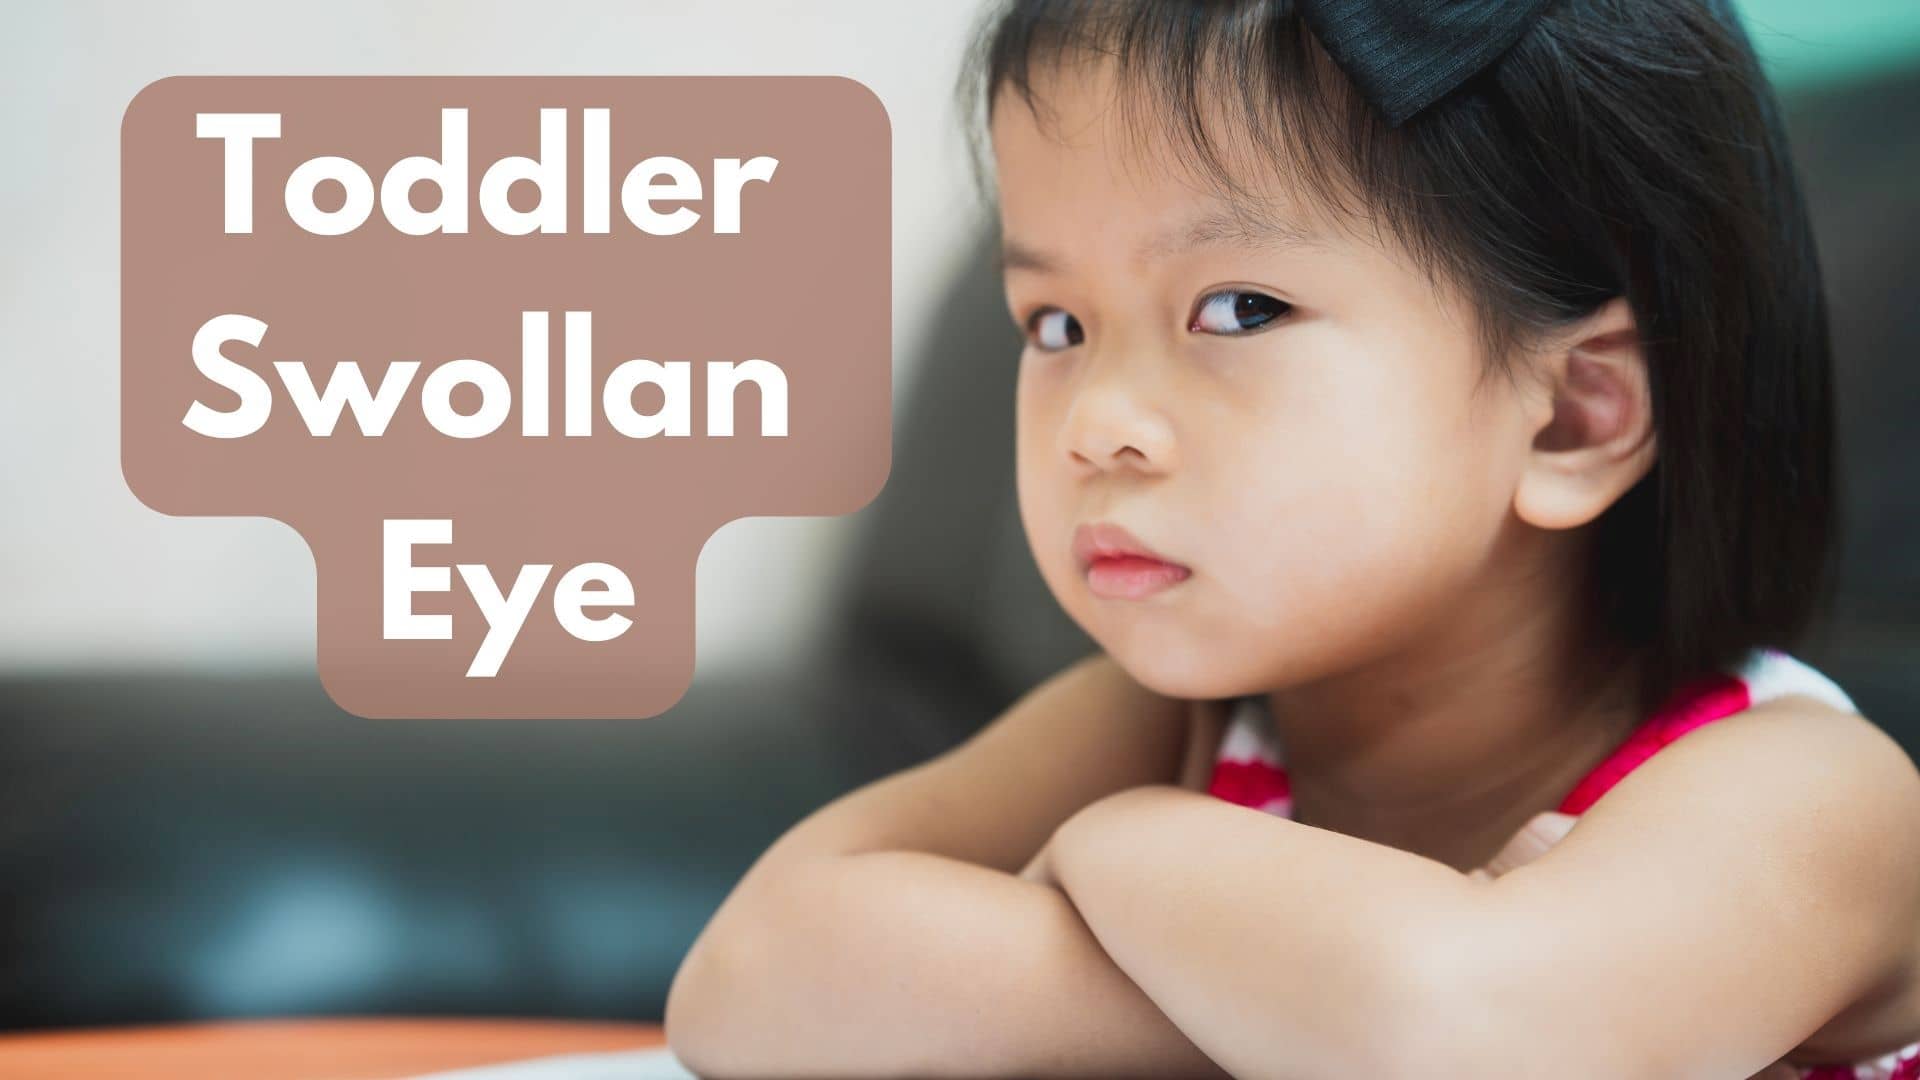 Why Did Your Toddler Woke Up With Swollan Eye?